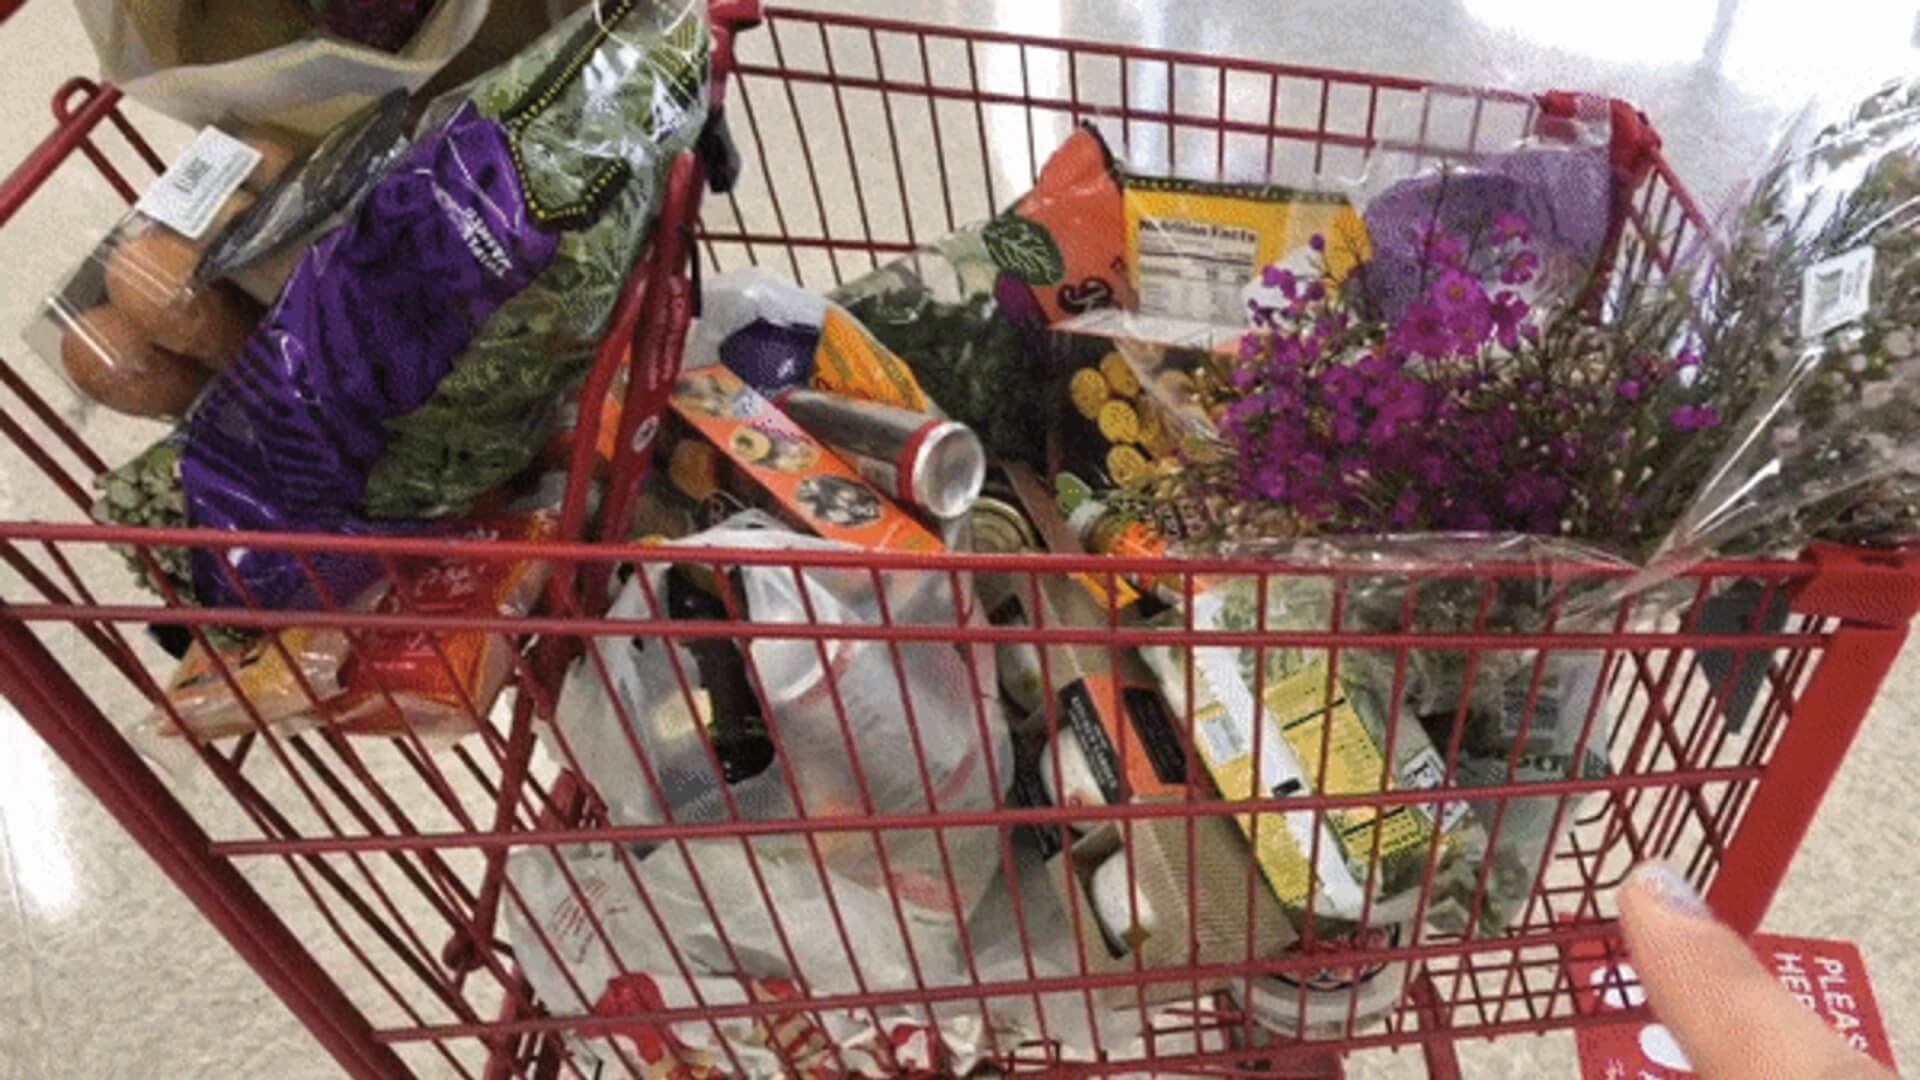 Shopping cart with two sets of groceries. The contents include Flowers, eggs, various cans and veggies.